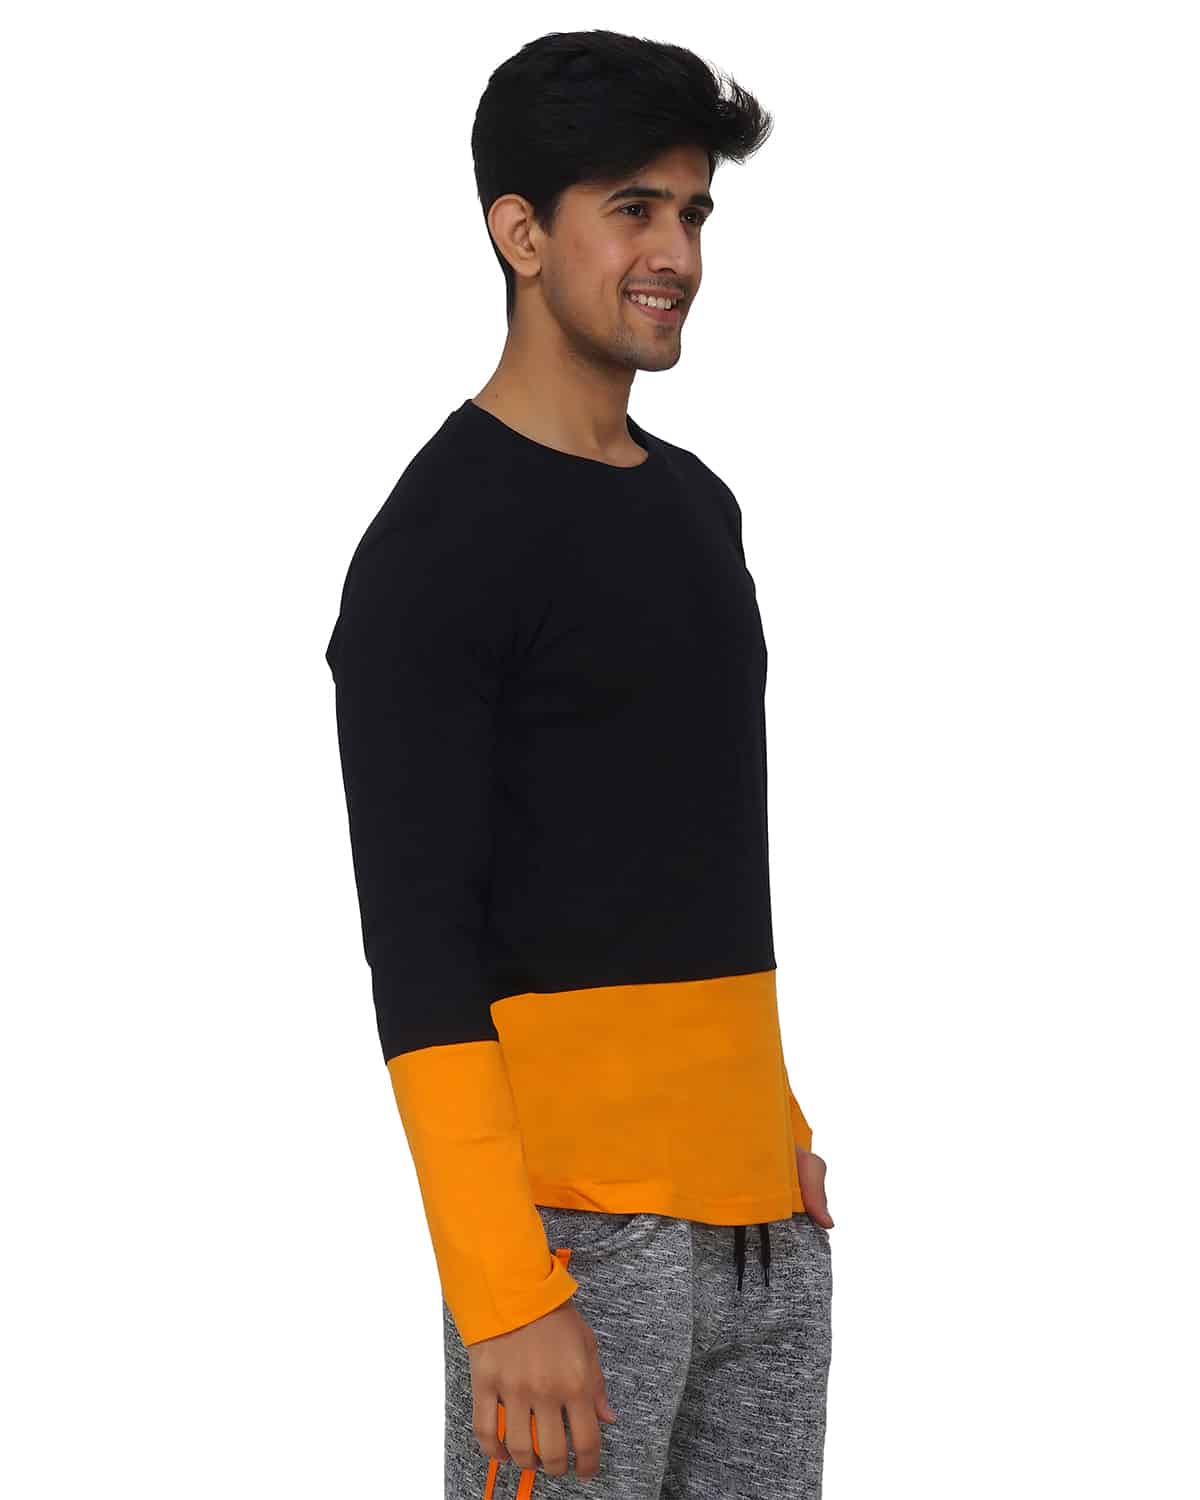 Color Block T-shirts full sleeves round neck half sleeves